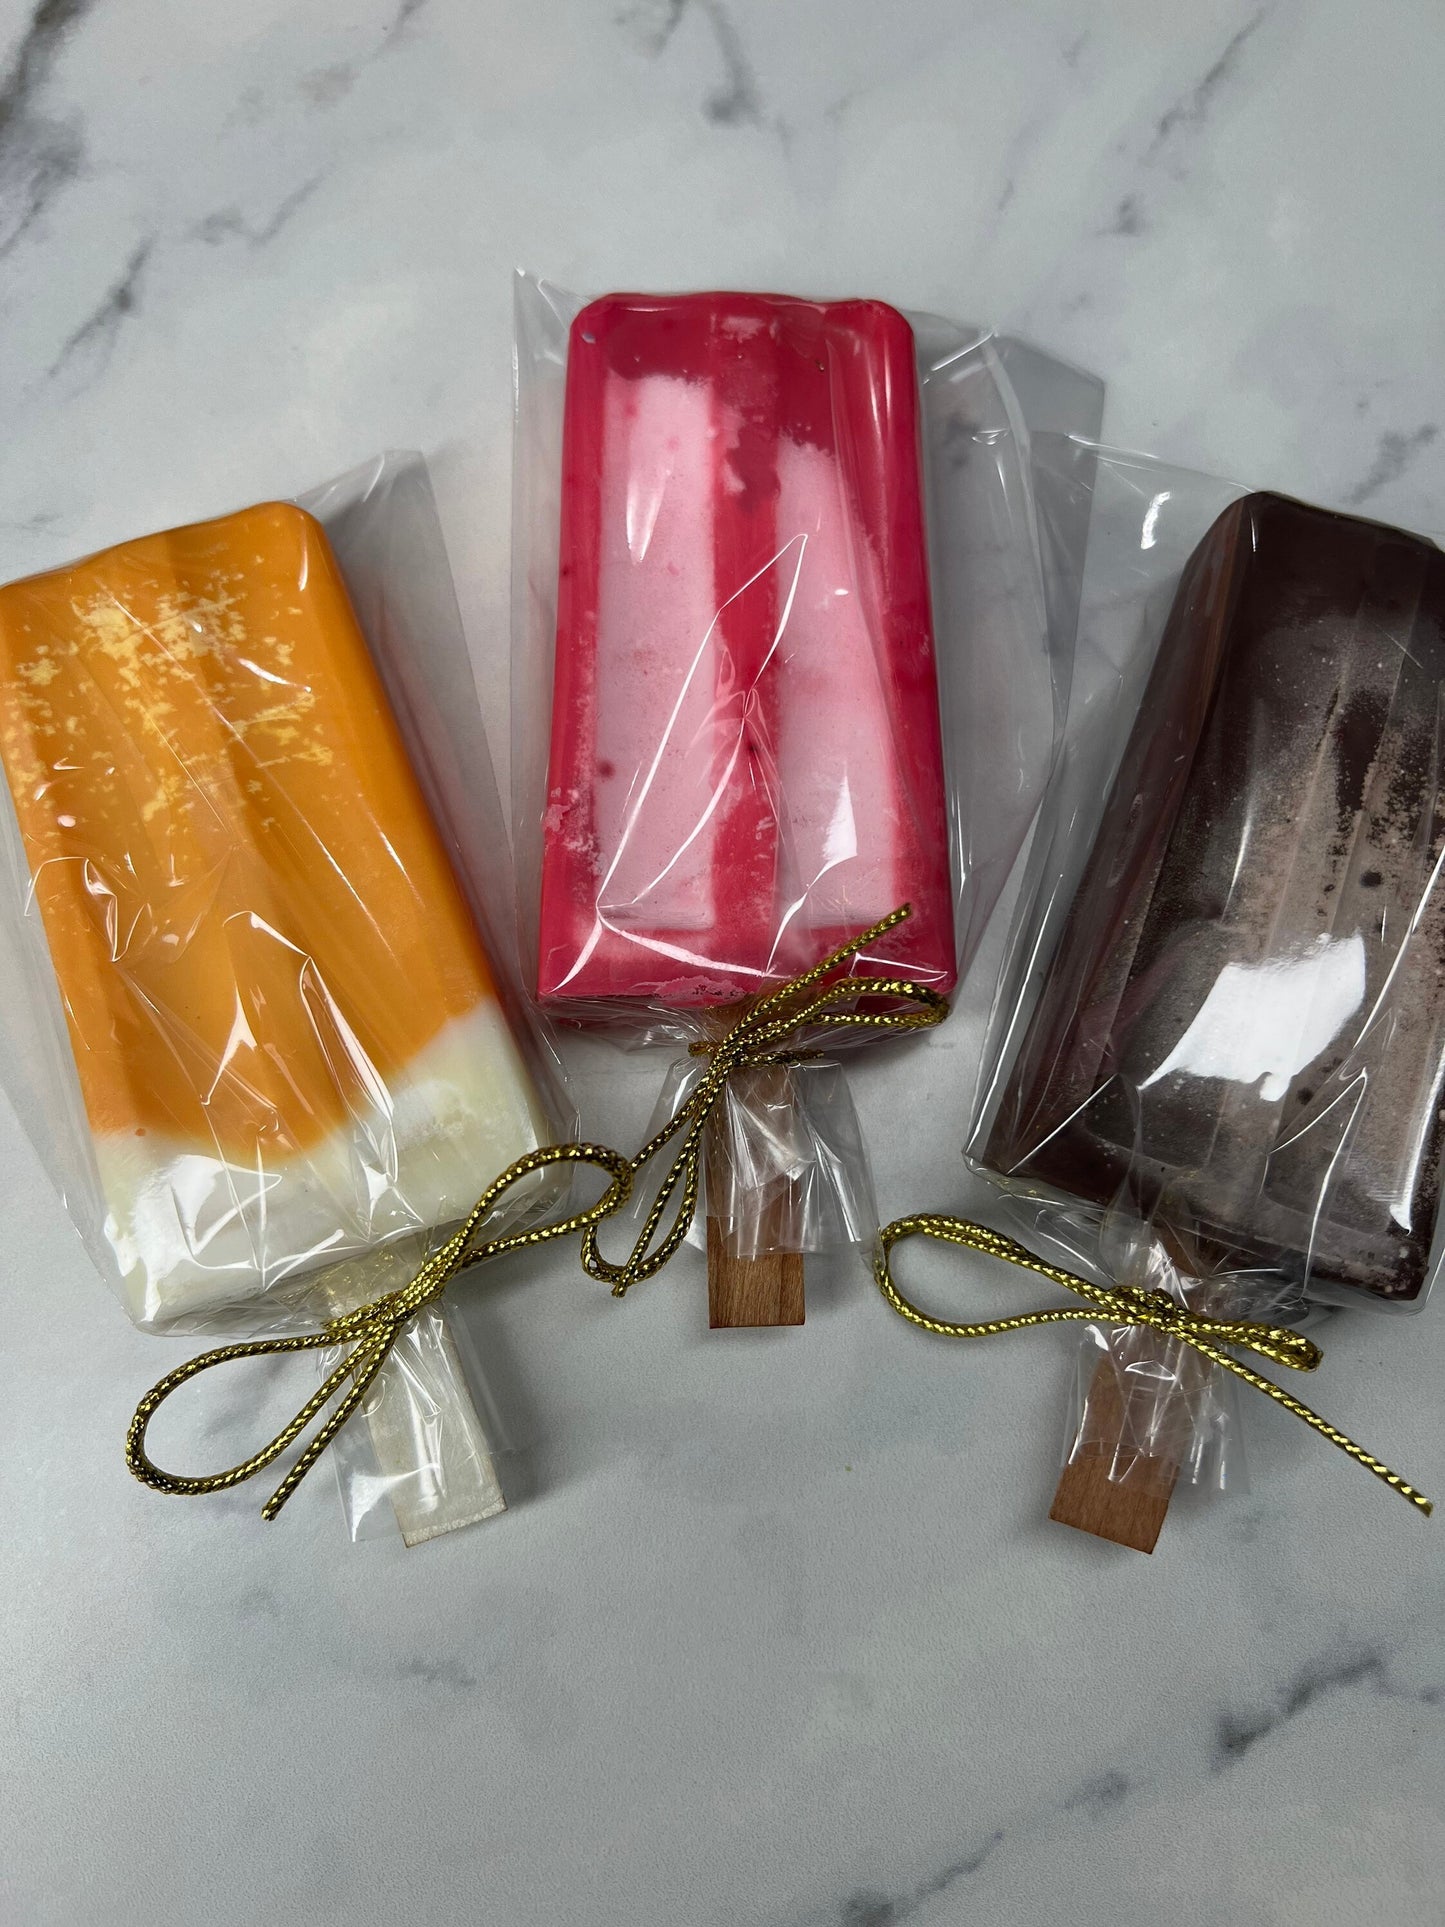 Popsicle candles